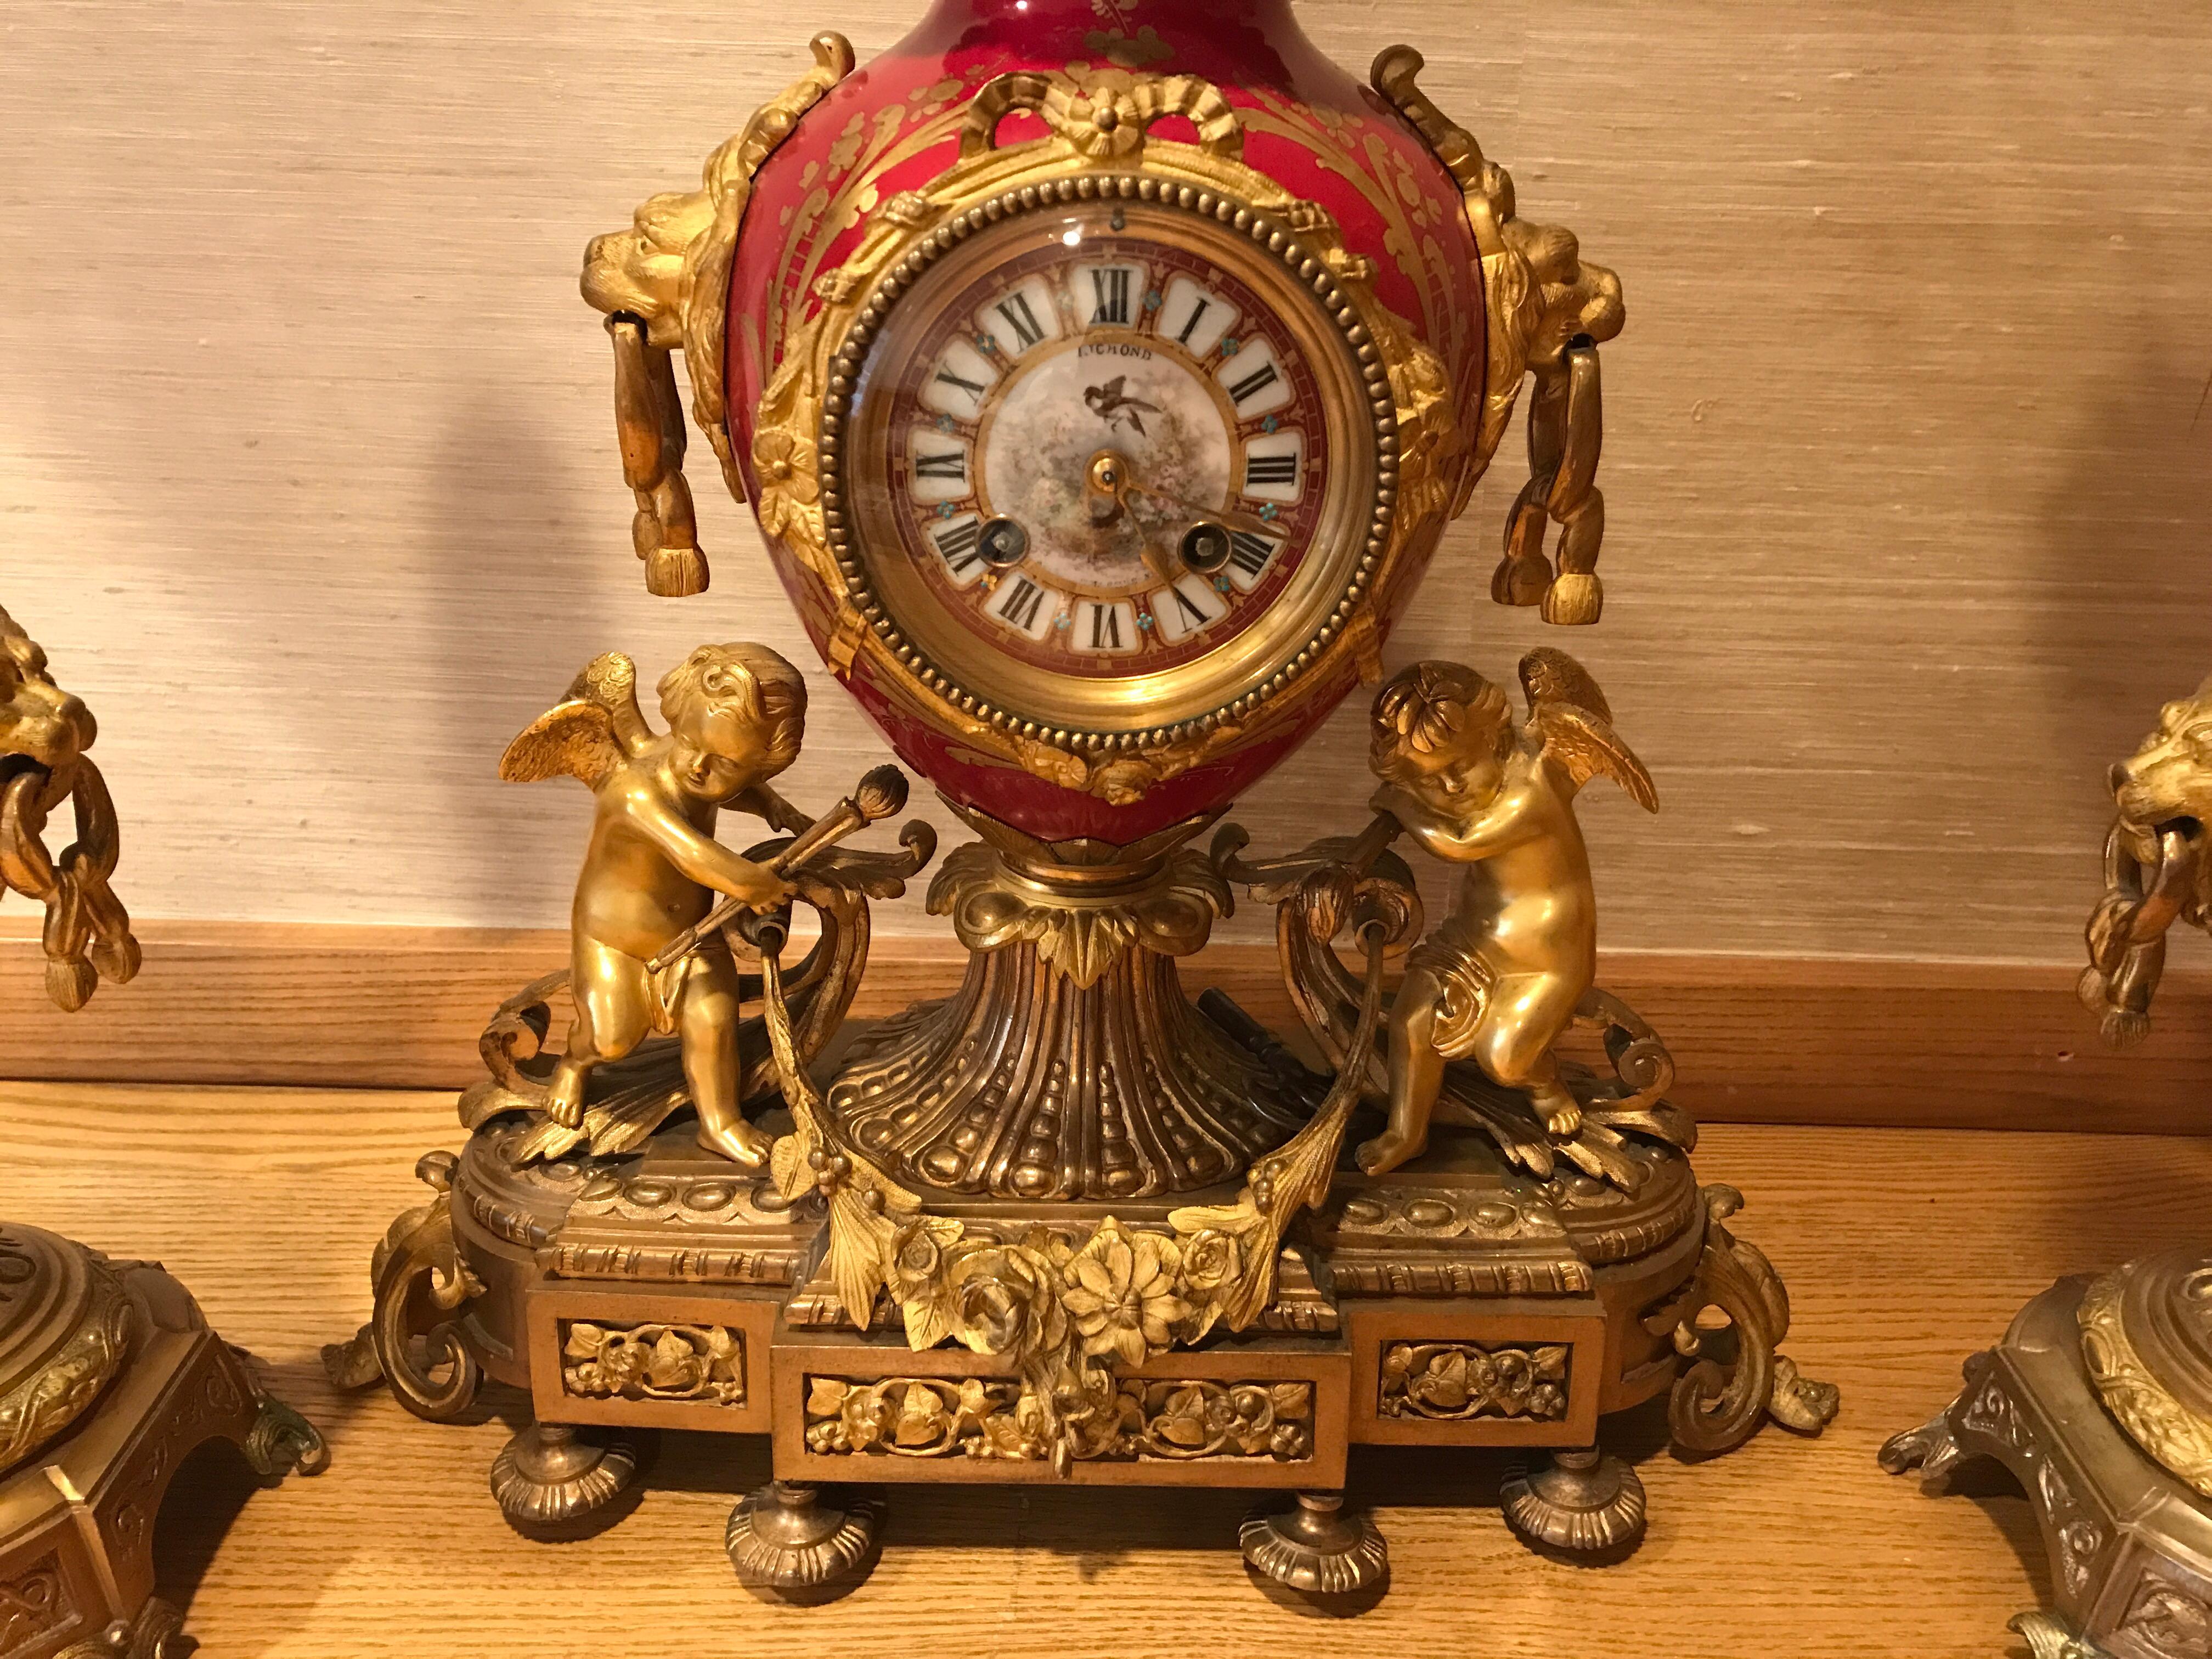 Beautiful 19th century gilt bronze mounted porcelain and enamel garniture set. Details include putti’s and lions clock clock face reads Richond  on top. No.11 on bottom
Candelabras are 21.5 H x 11 W x 10 D.